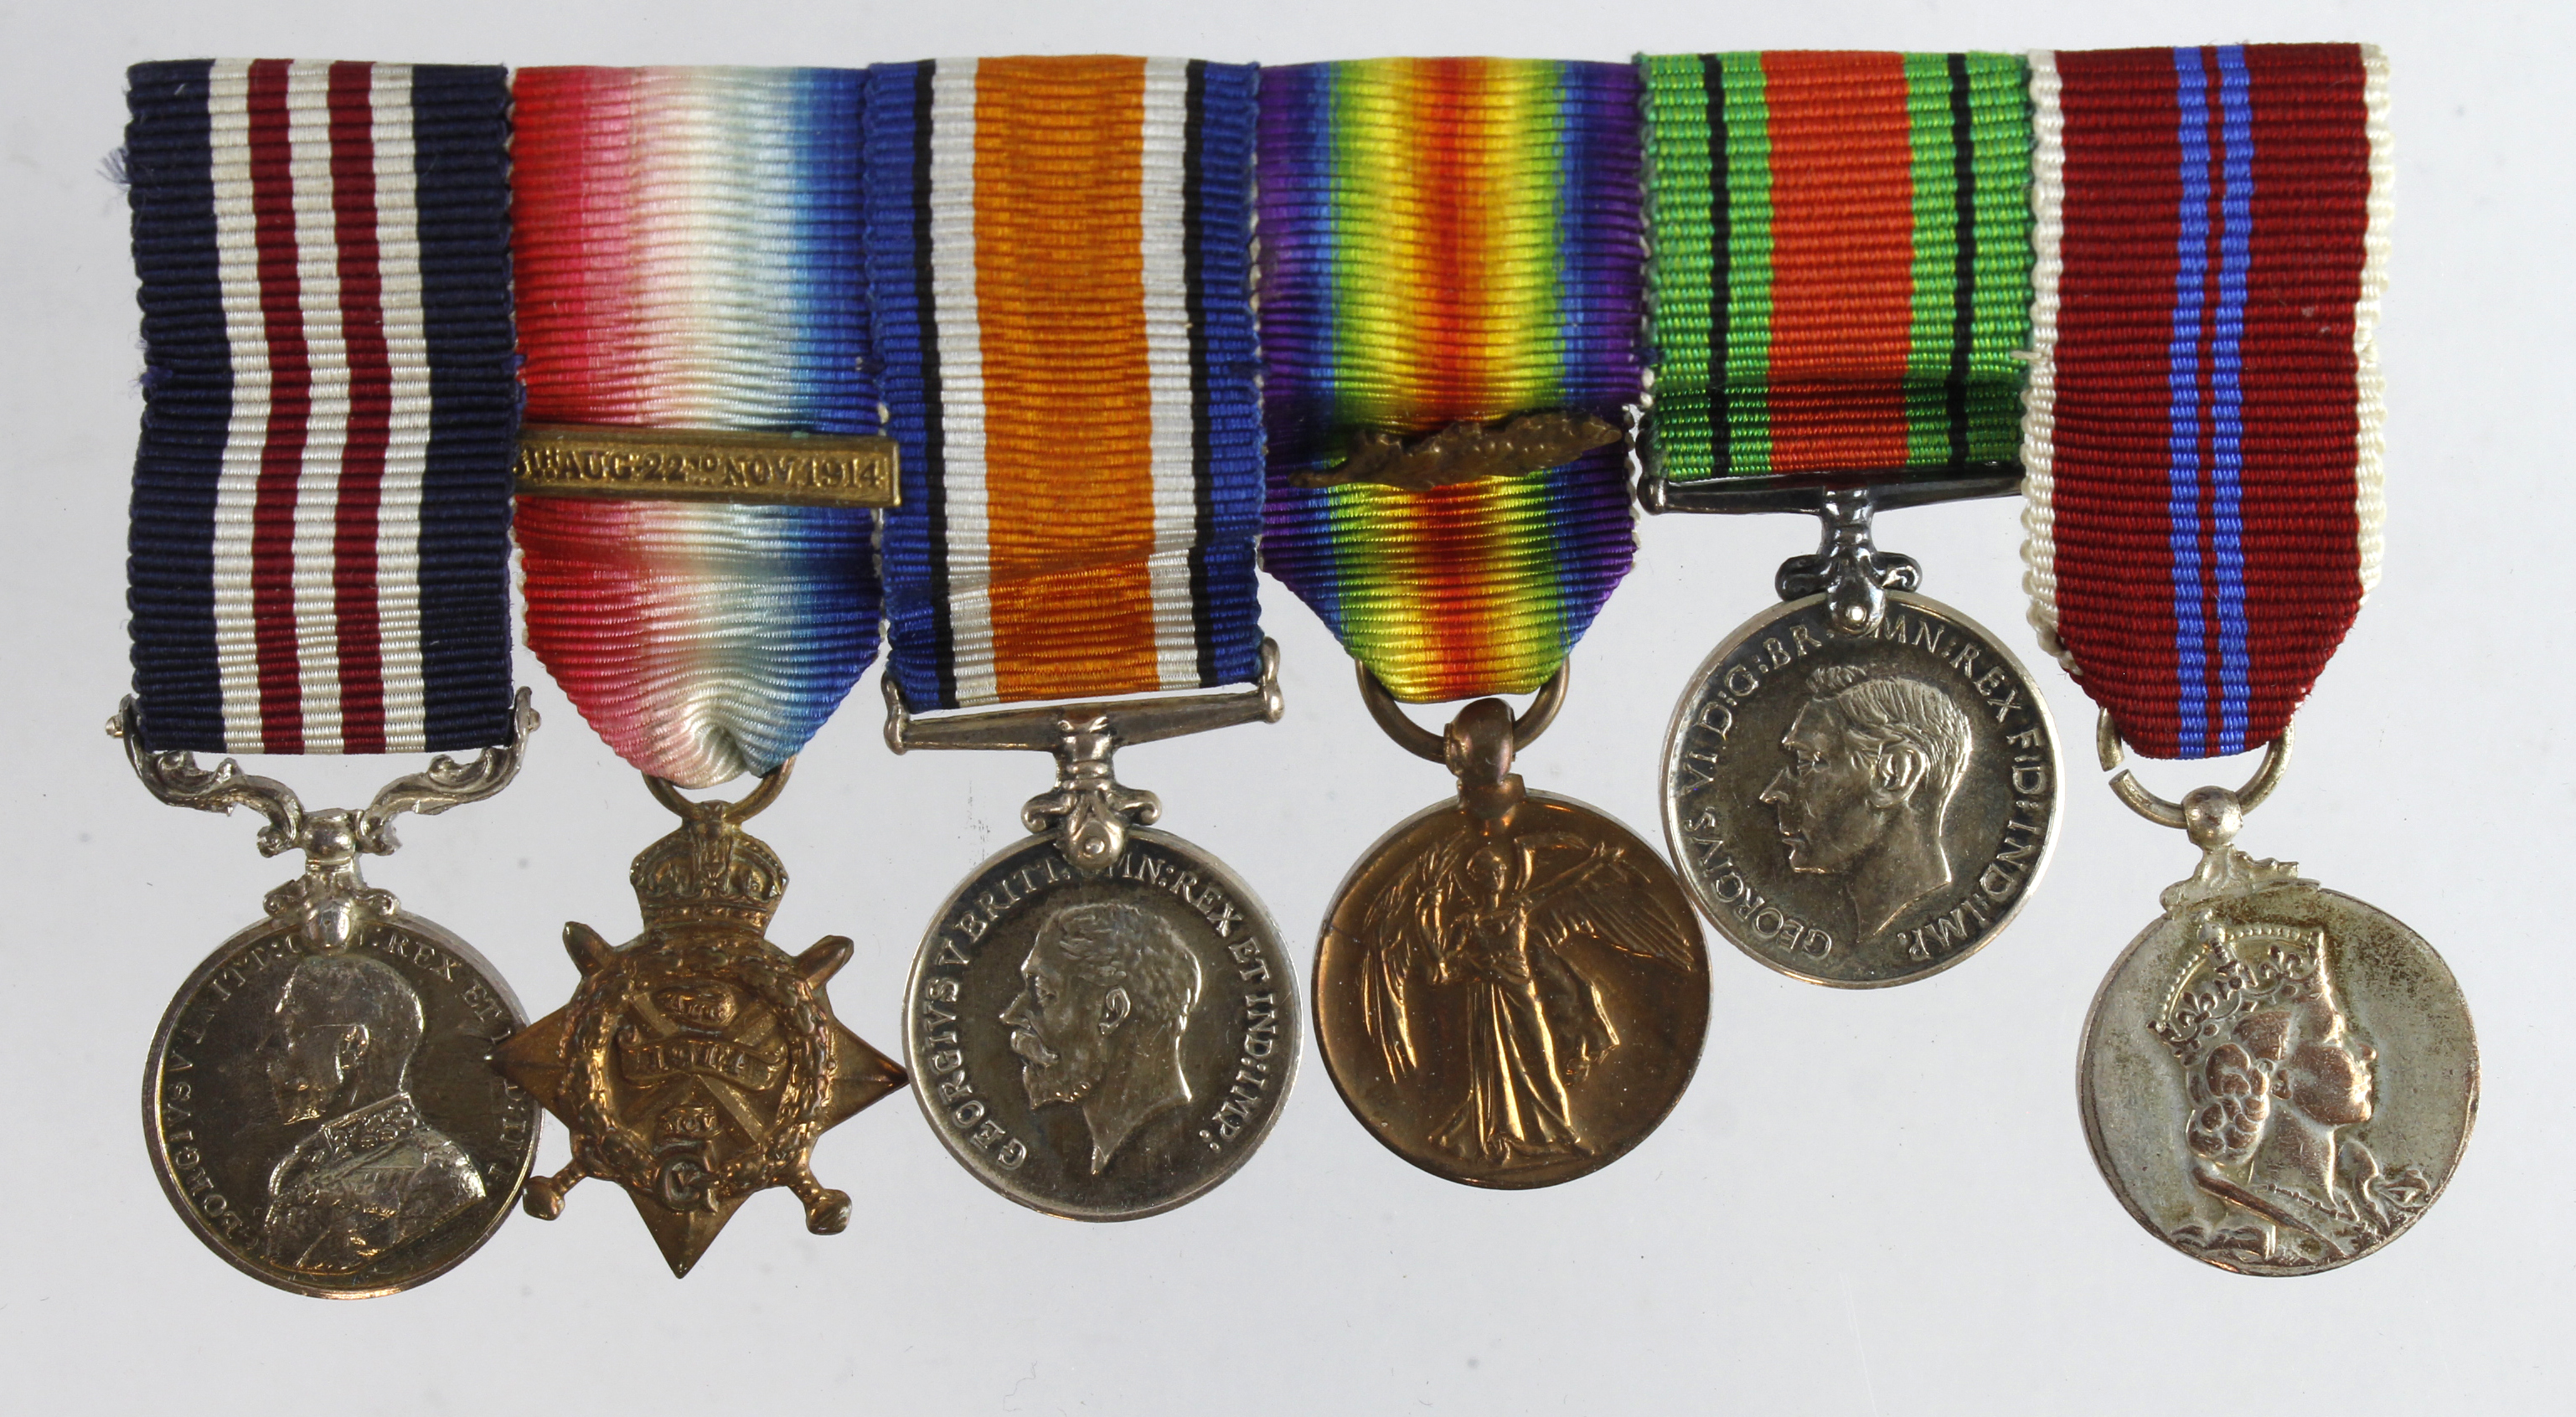 Minature Medal group mounted as worn - Military Medal GV, 1914 Star Trio with clasp and MID, Defence